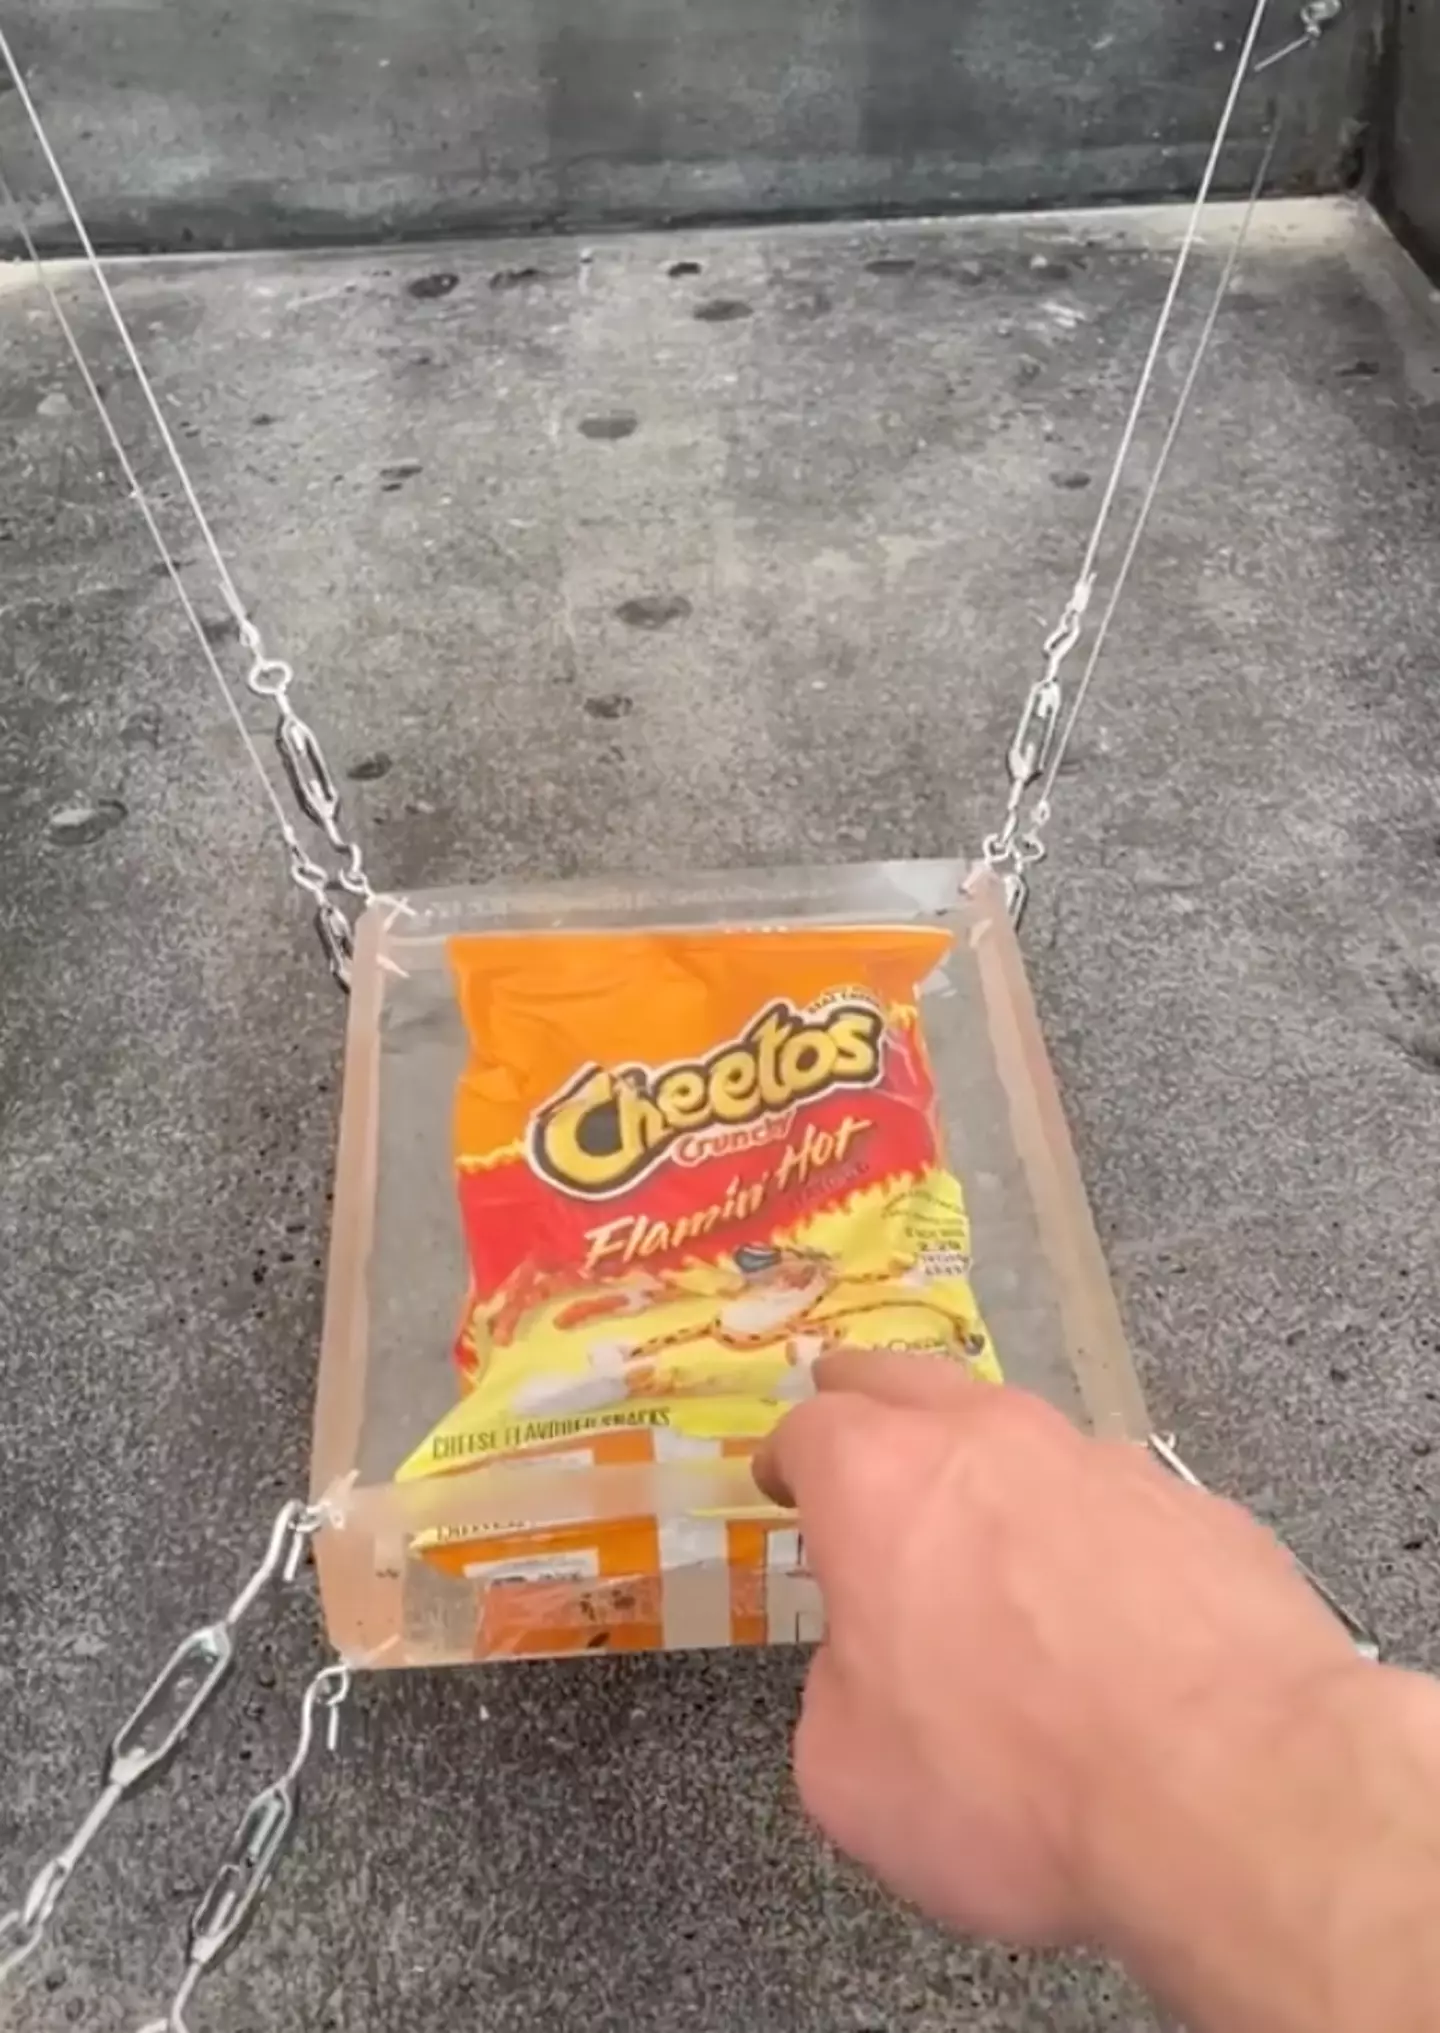 The Cheetos should not be uncovered for thousands of years.